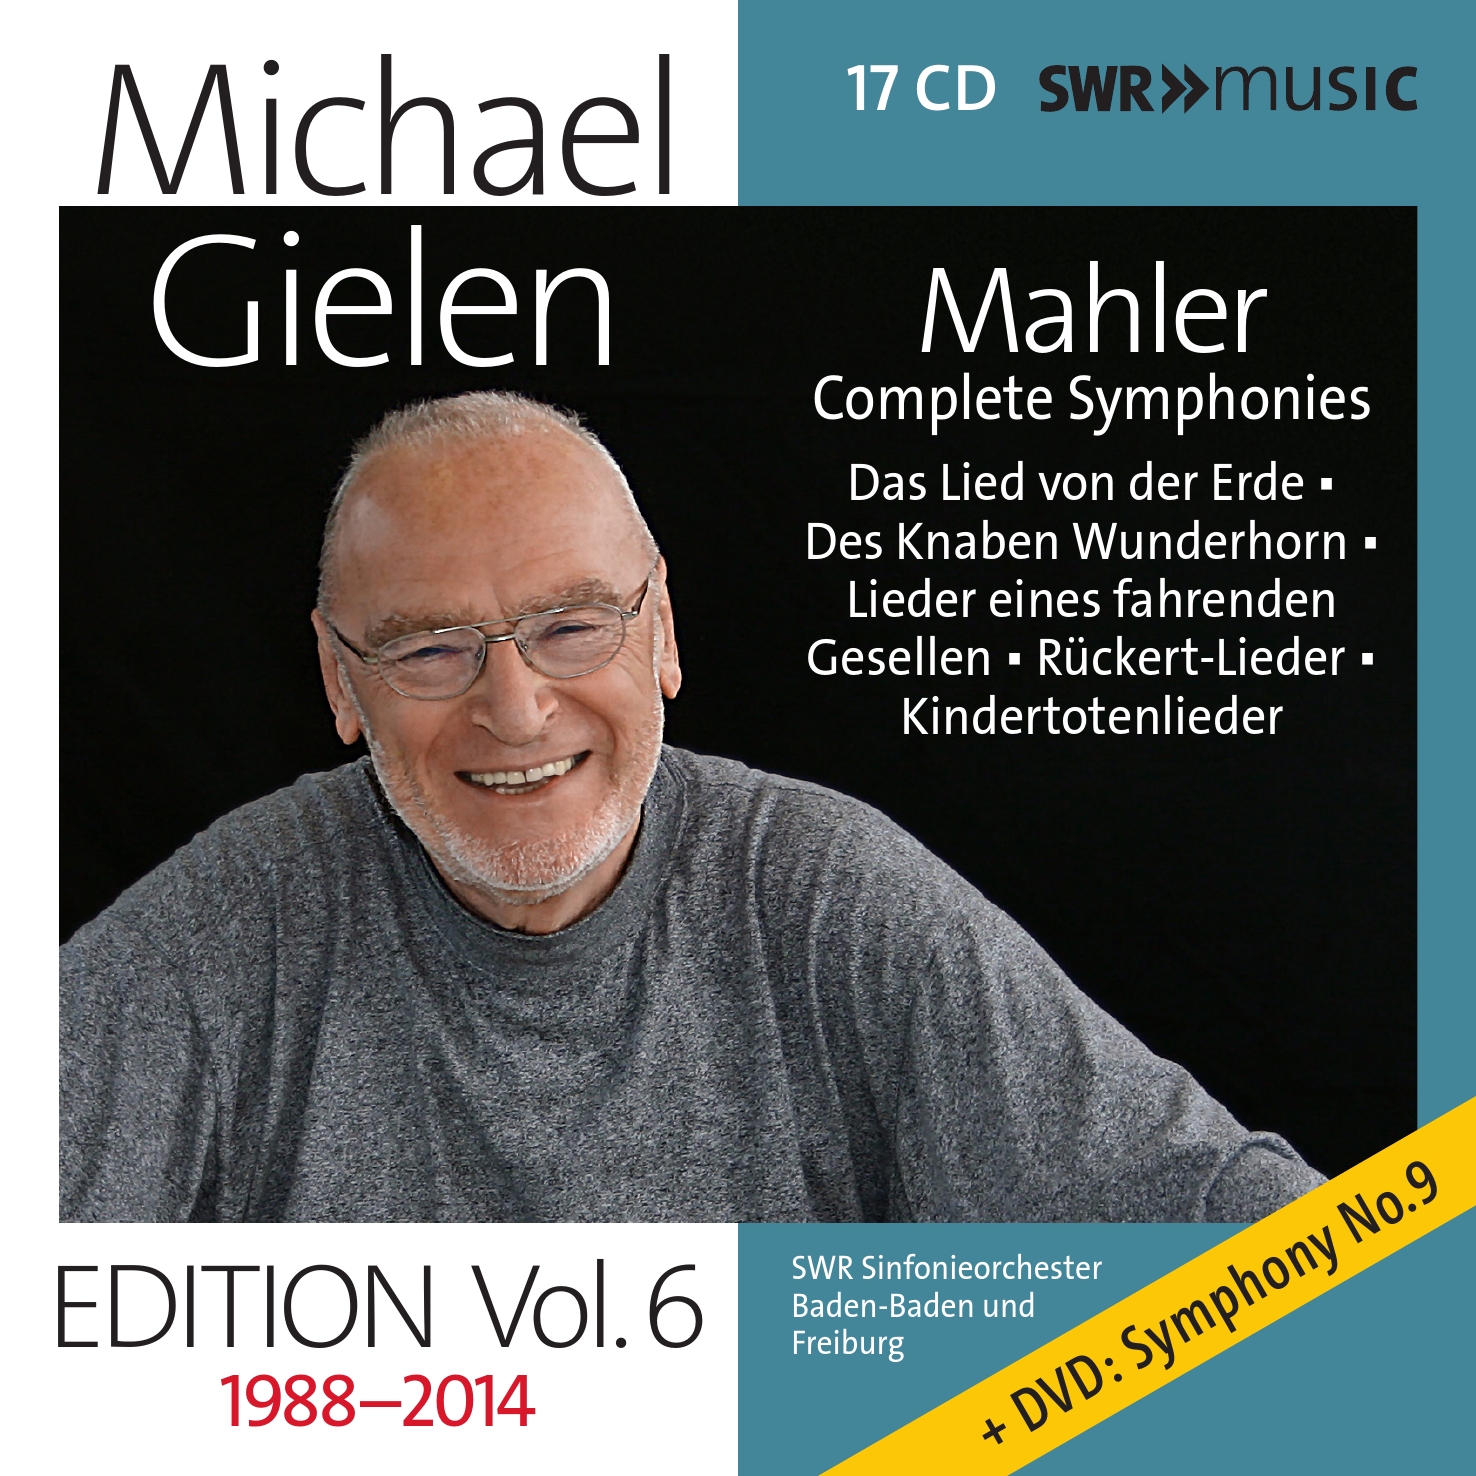 Michael Gielen Ed - Vol 6 Mahler Symphonies and. Song Cycles Recorded 1988-2014 cd08